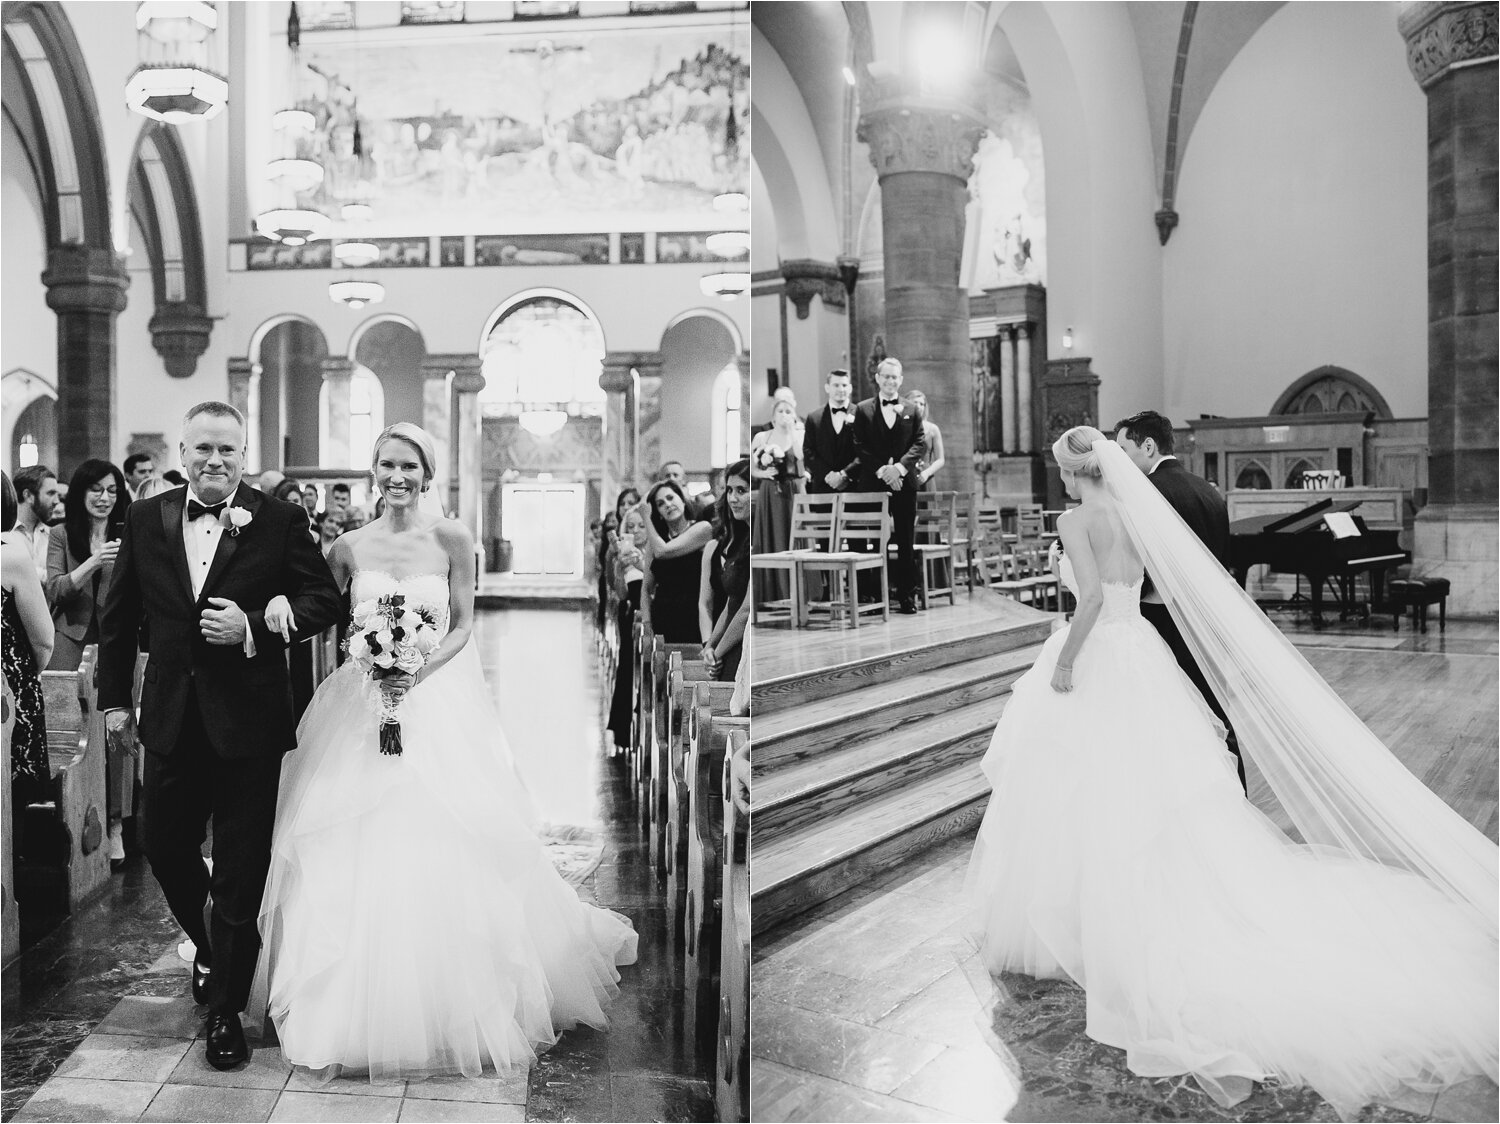 Father and Bride Walking Down Aisle at Church Ceremony